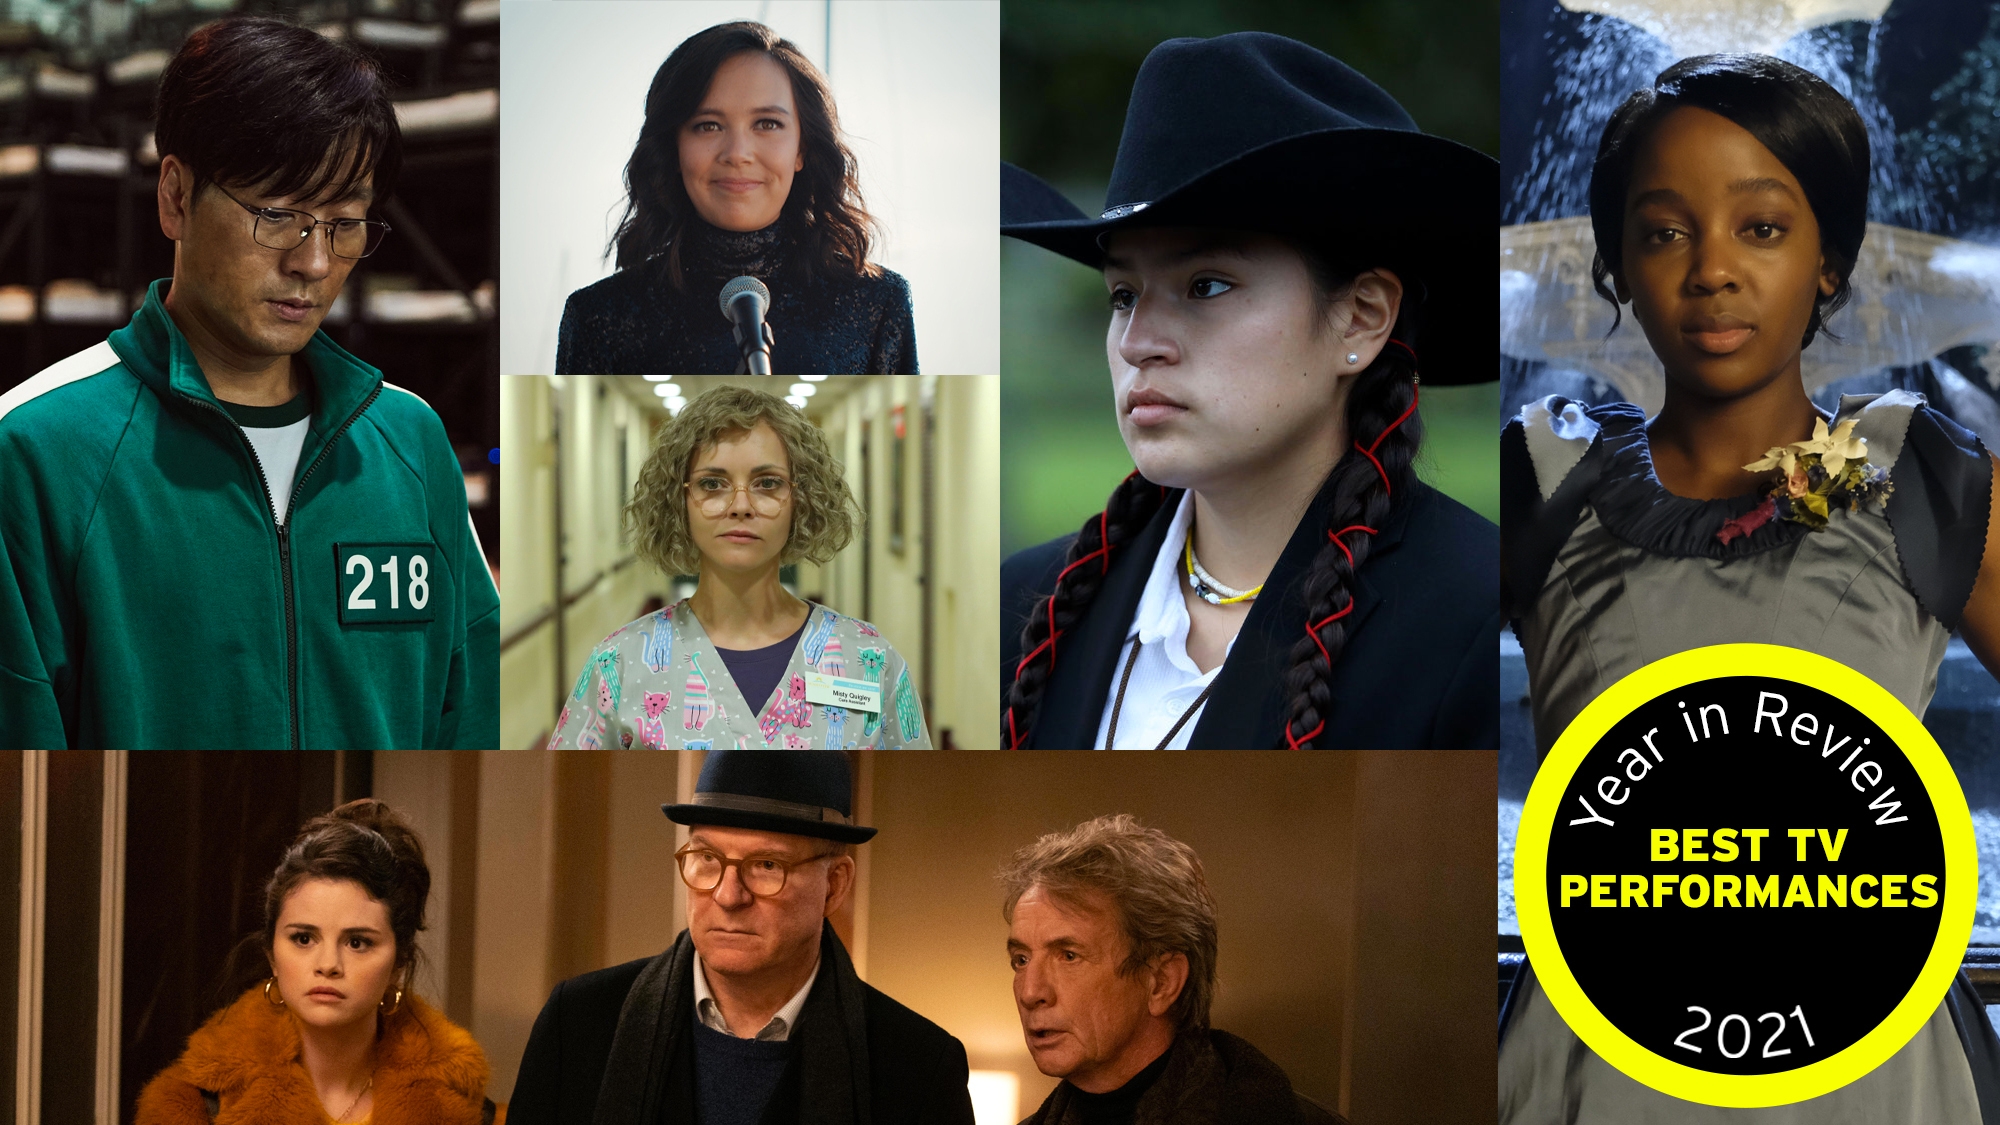 The best TV performances of 2021